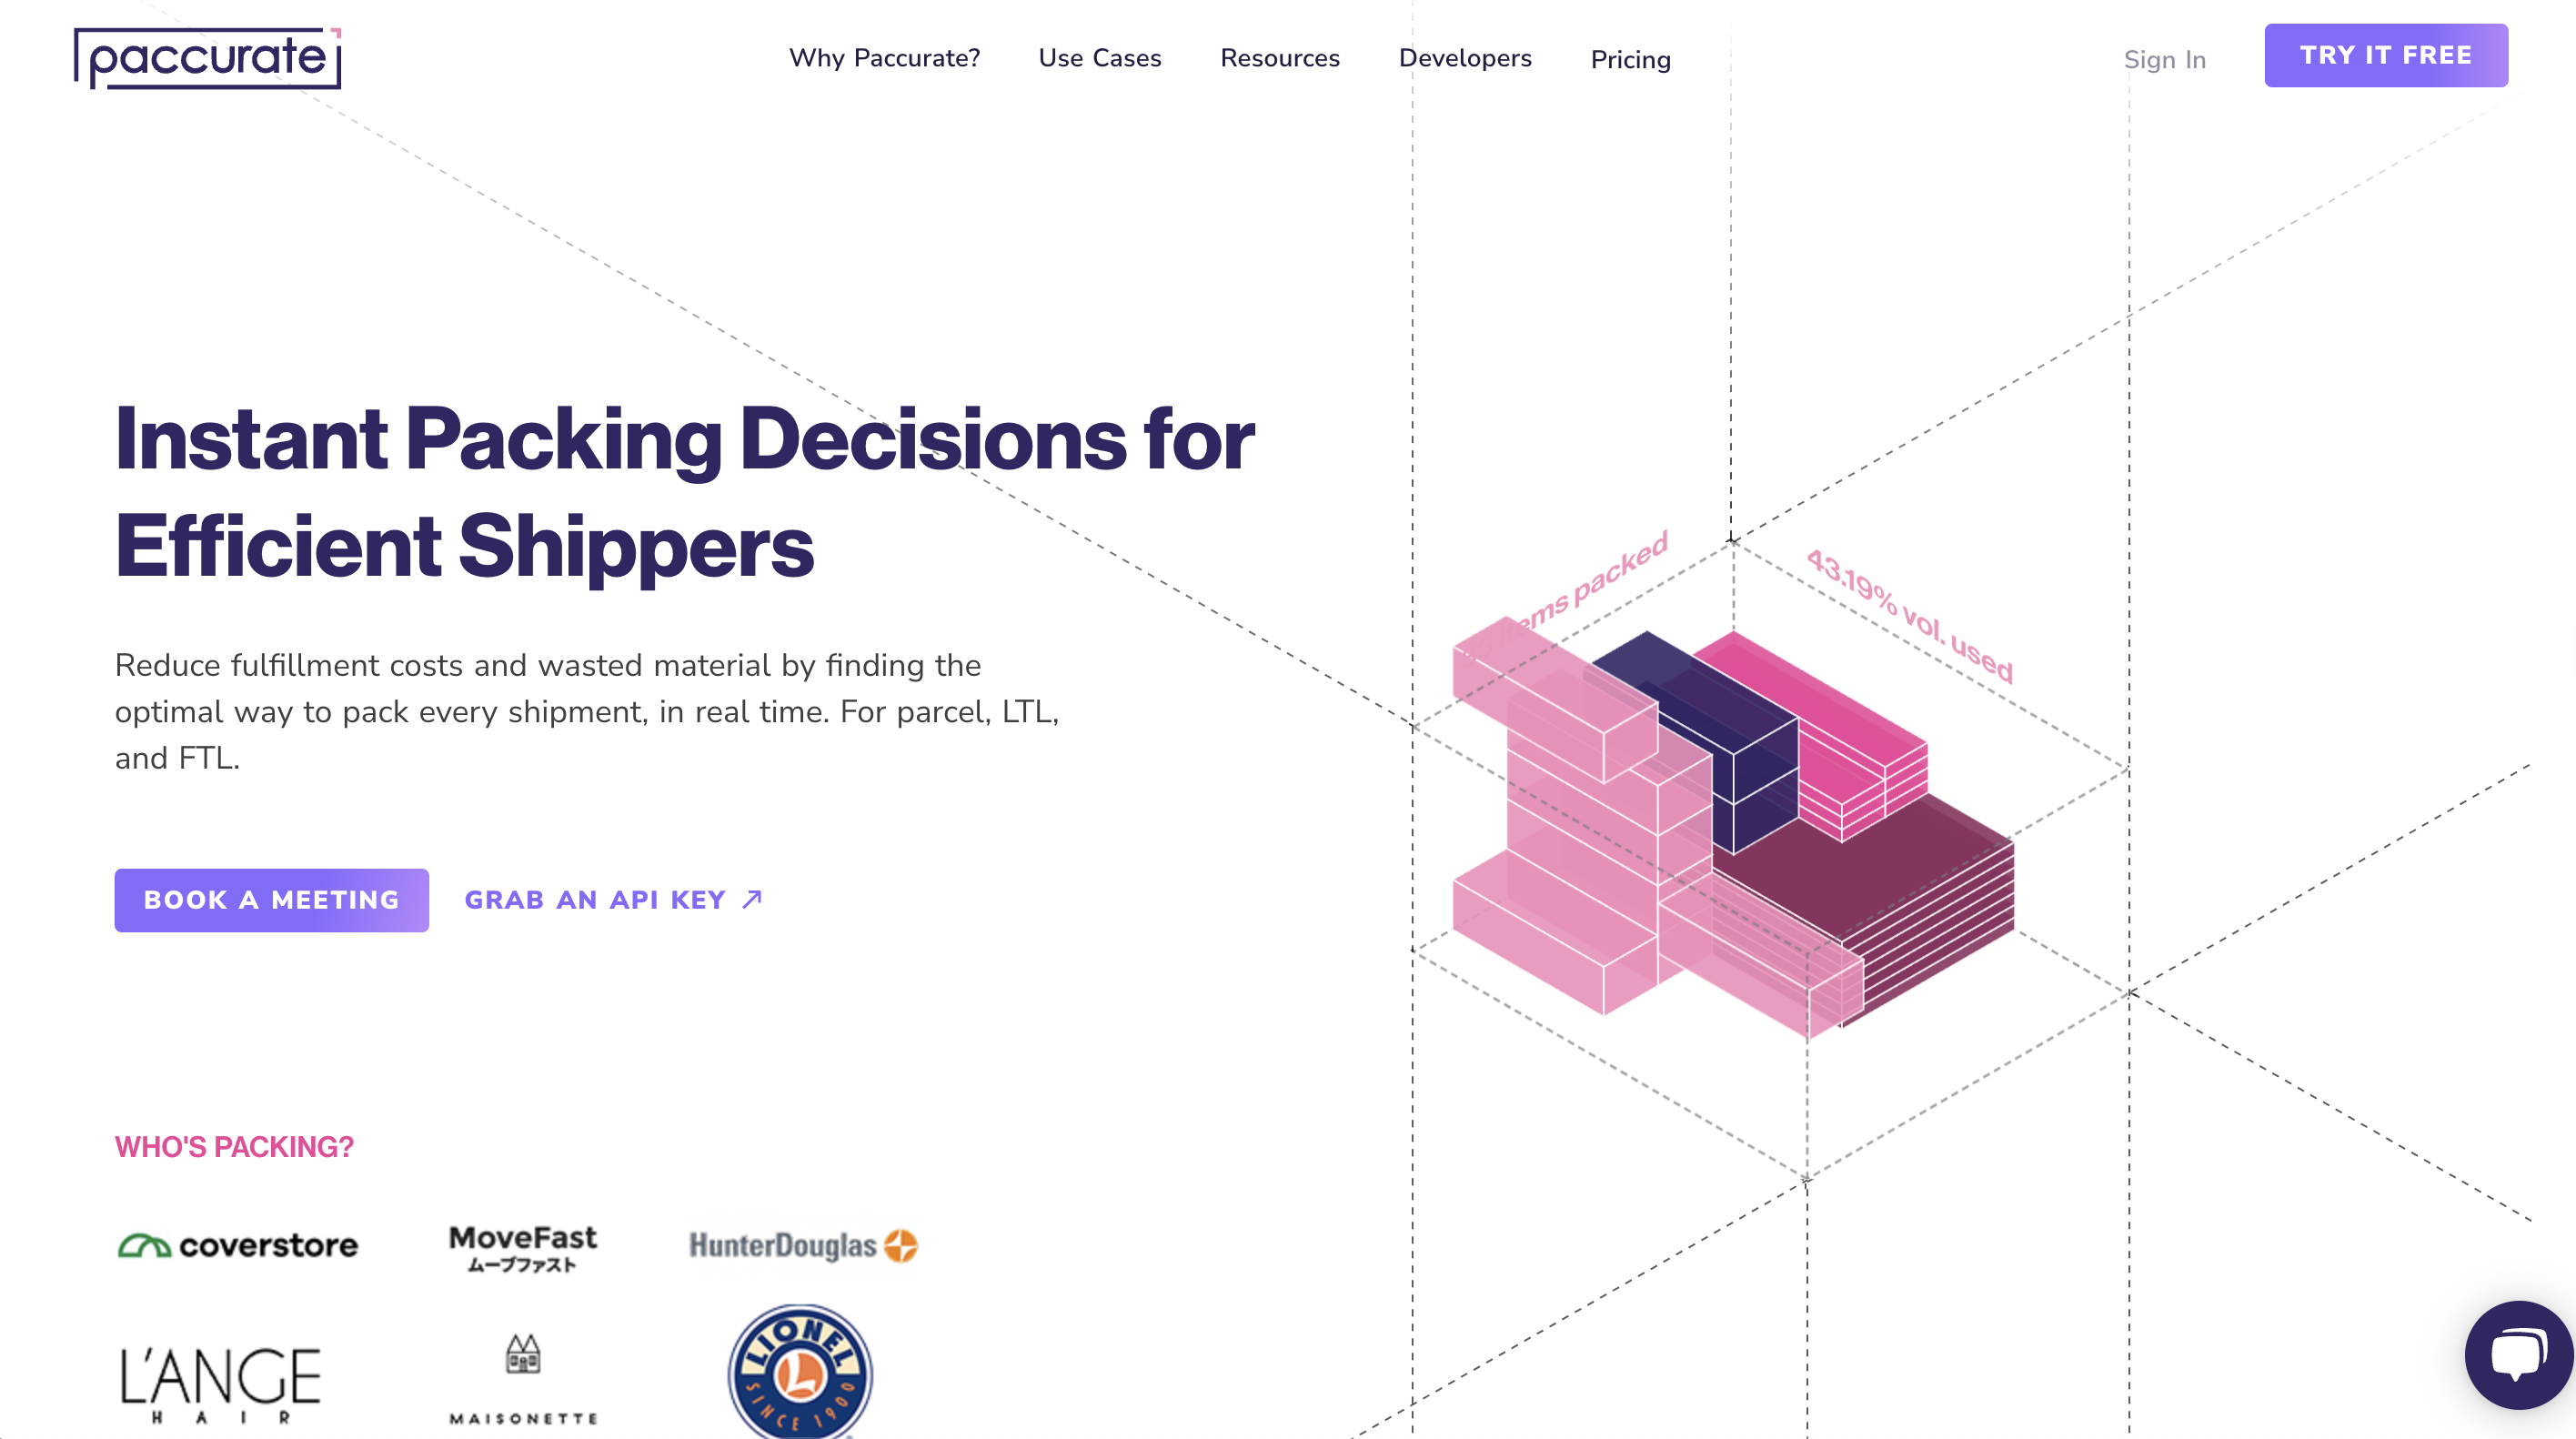 Paccurate Landing page